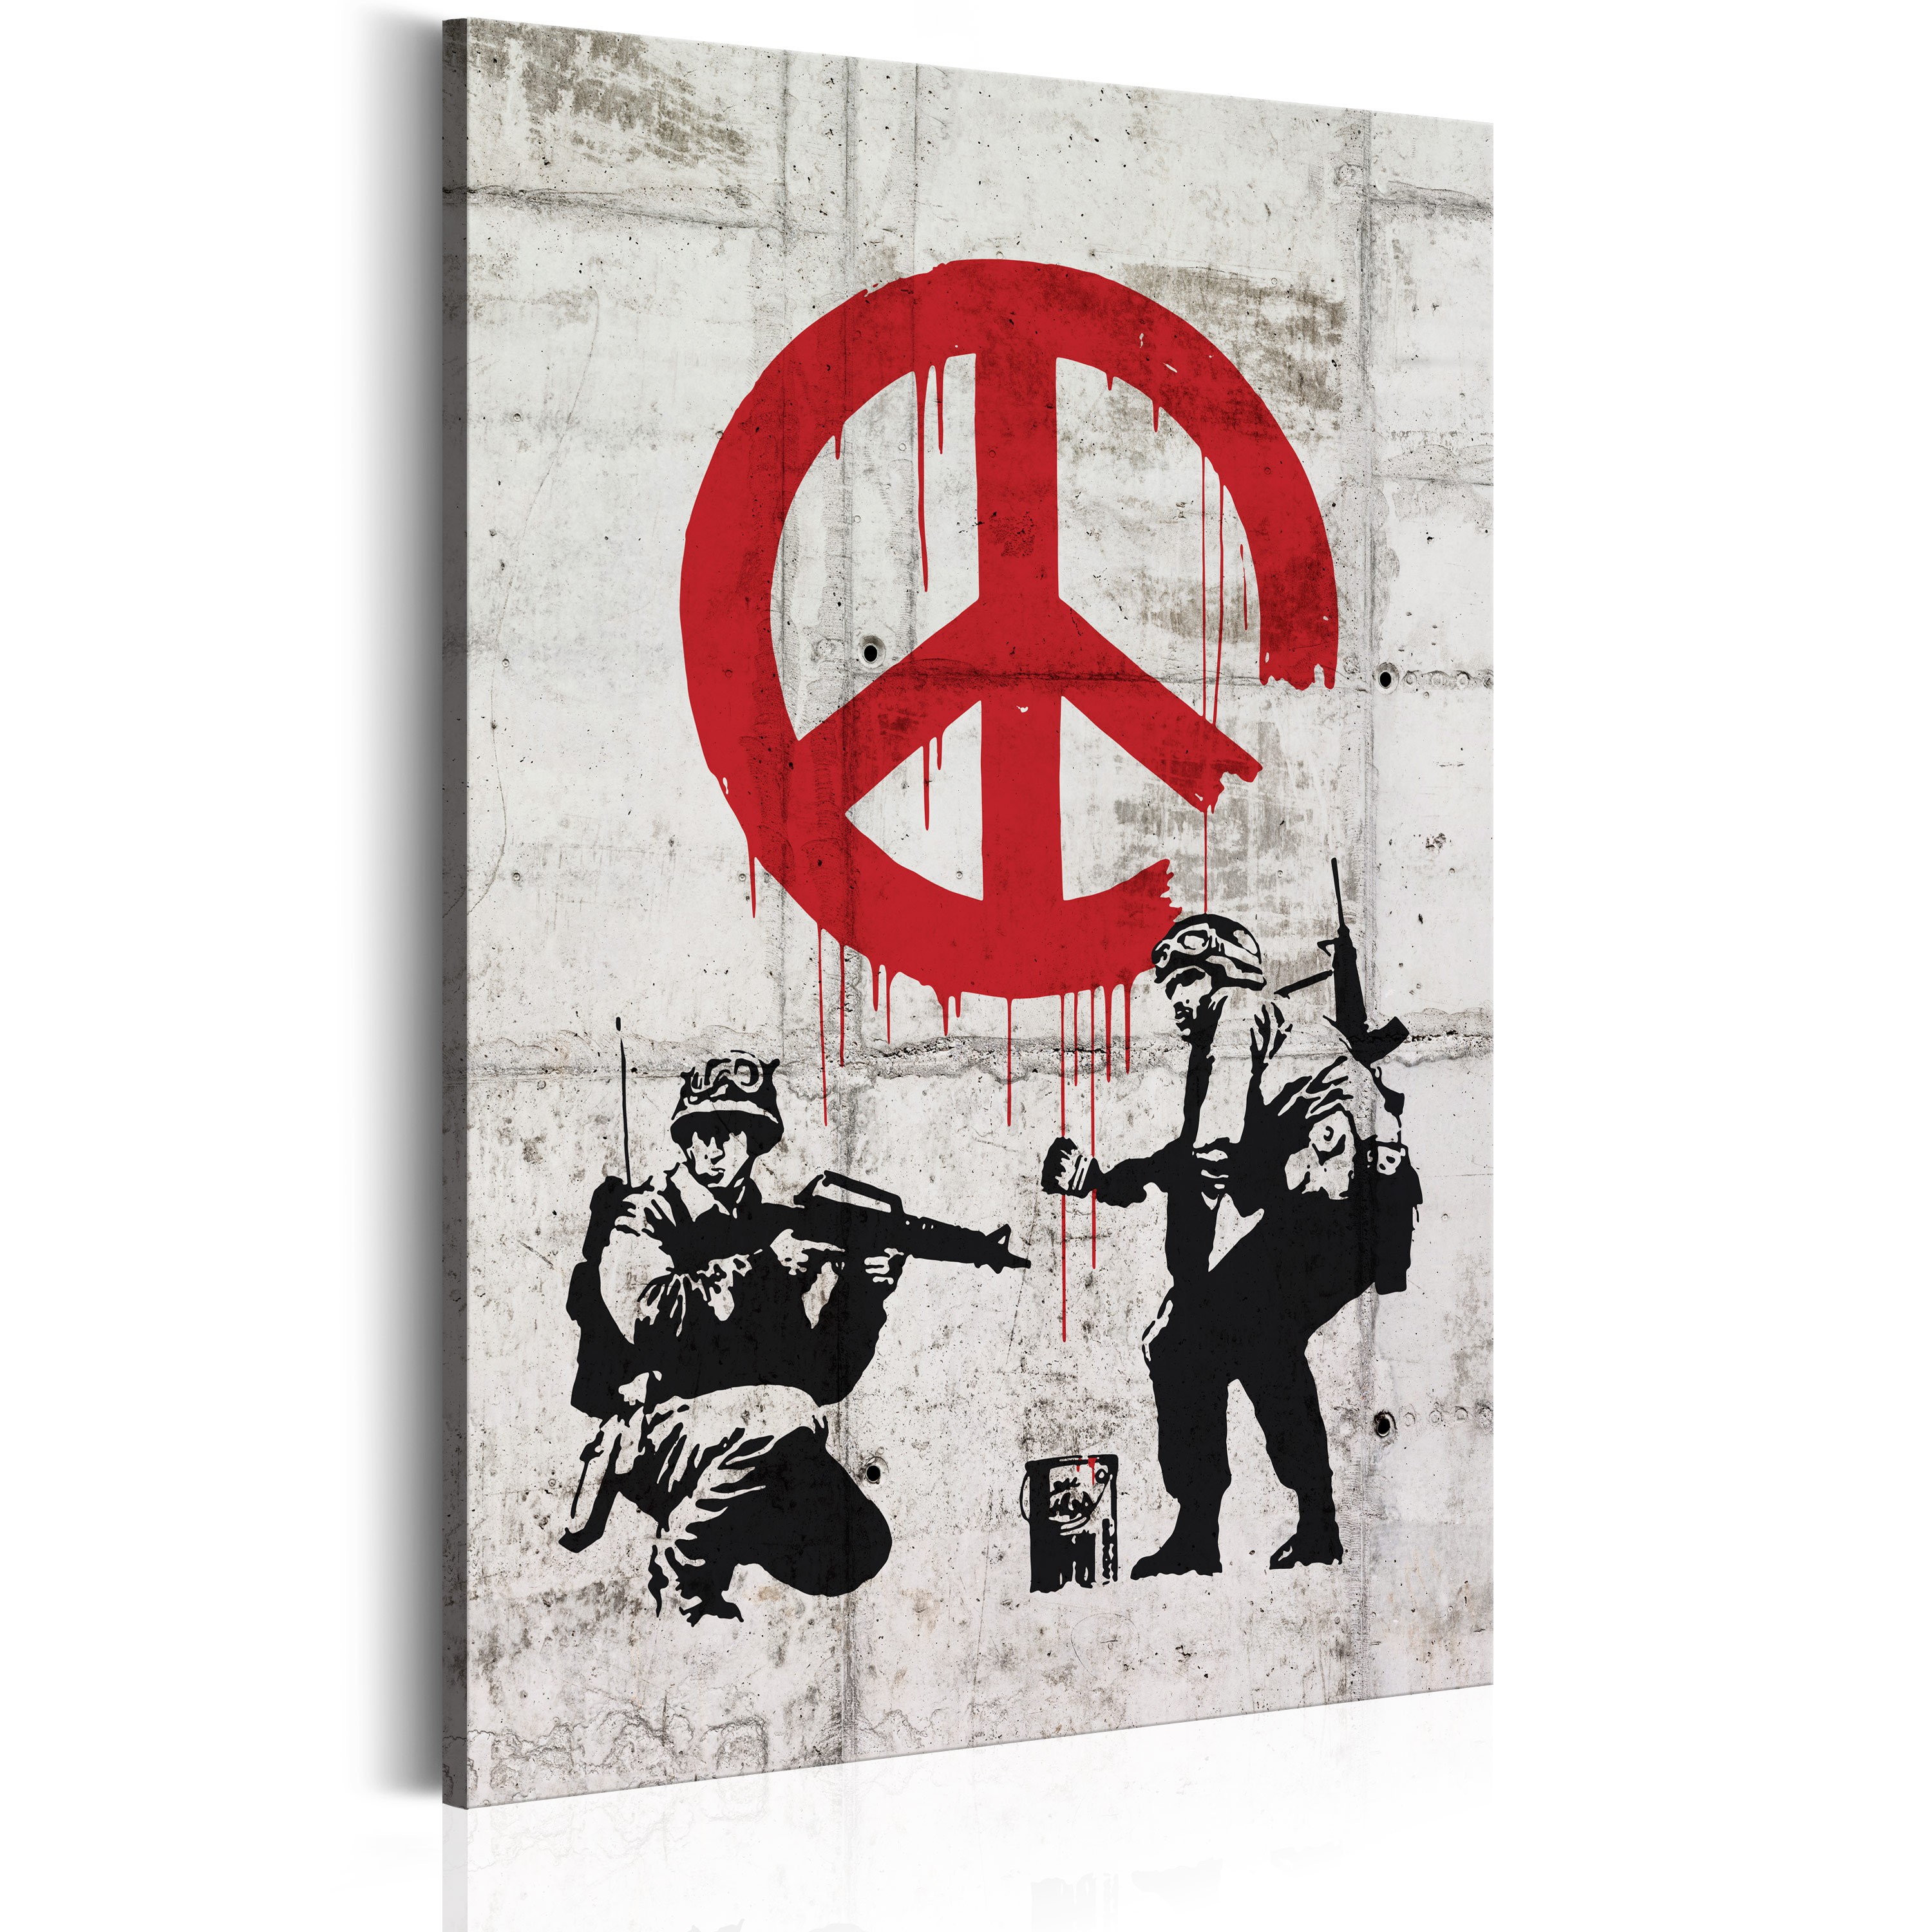 Canvas Print - Soldiers Painting Peace by Banksy - 40x60